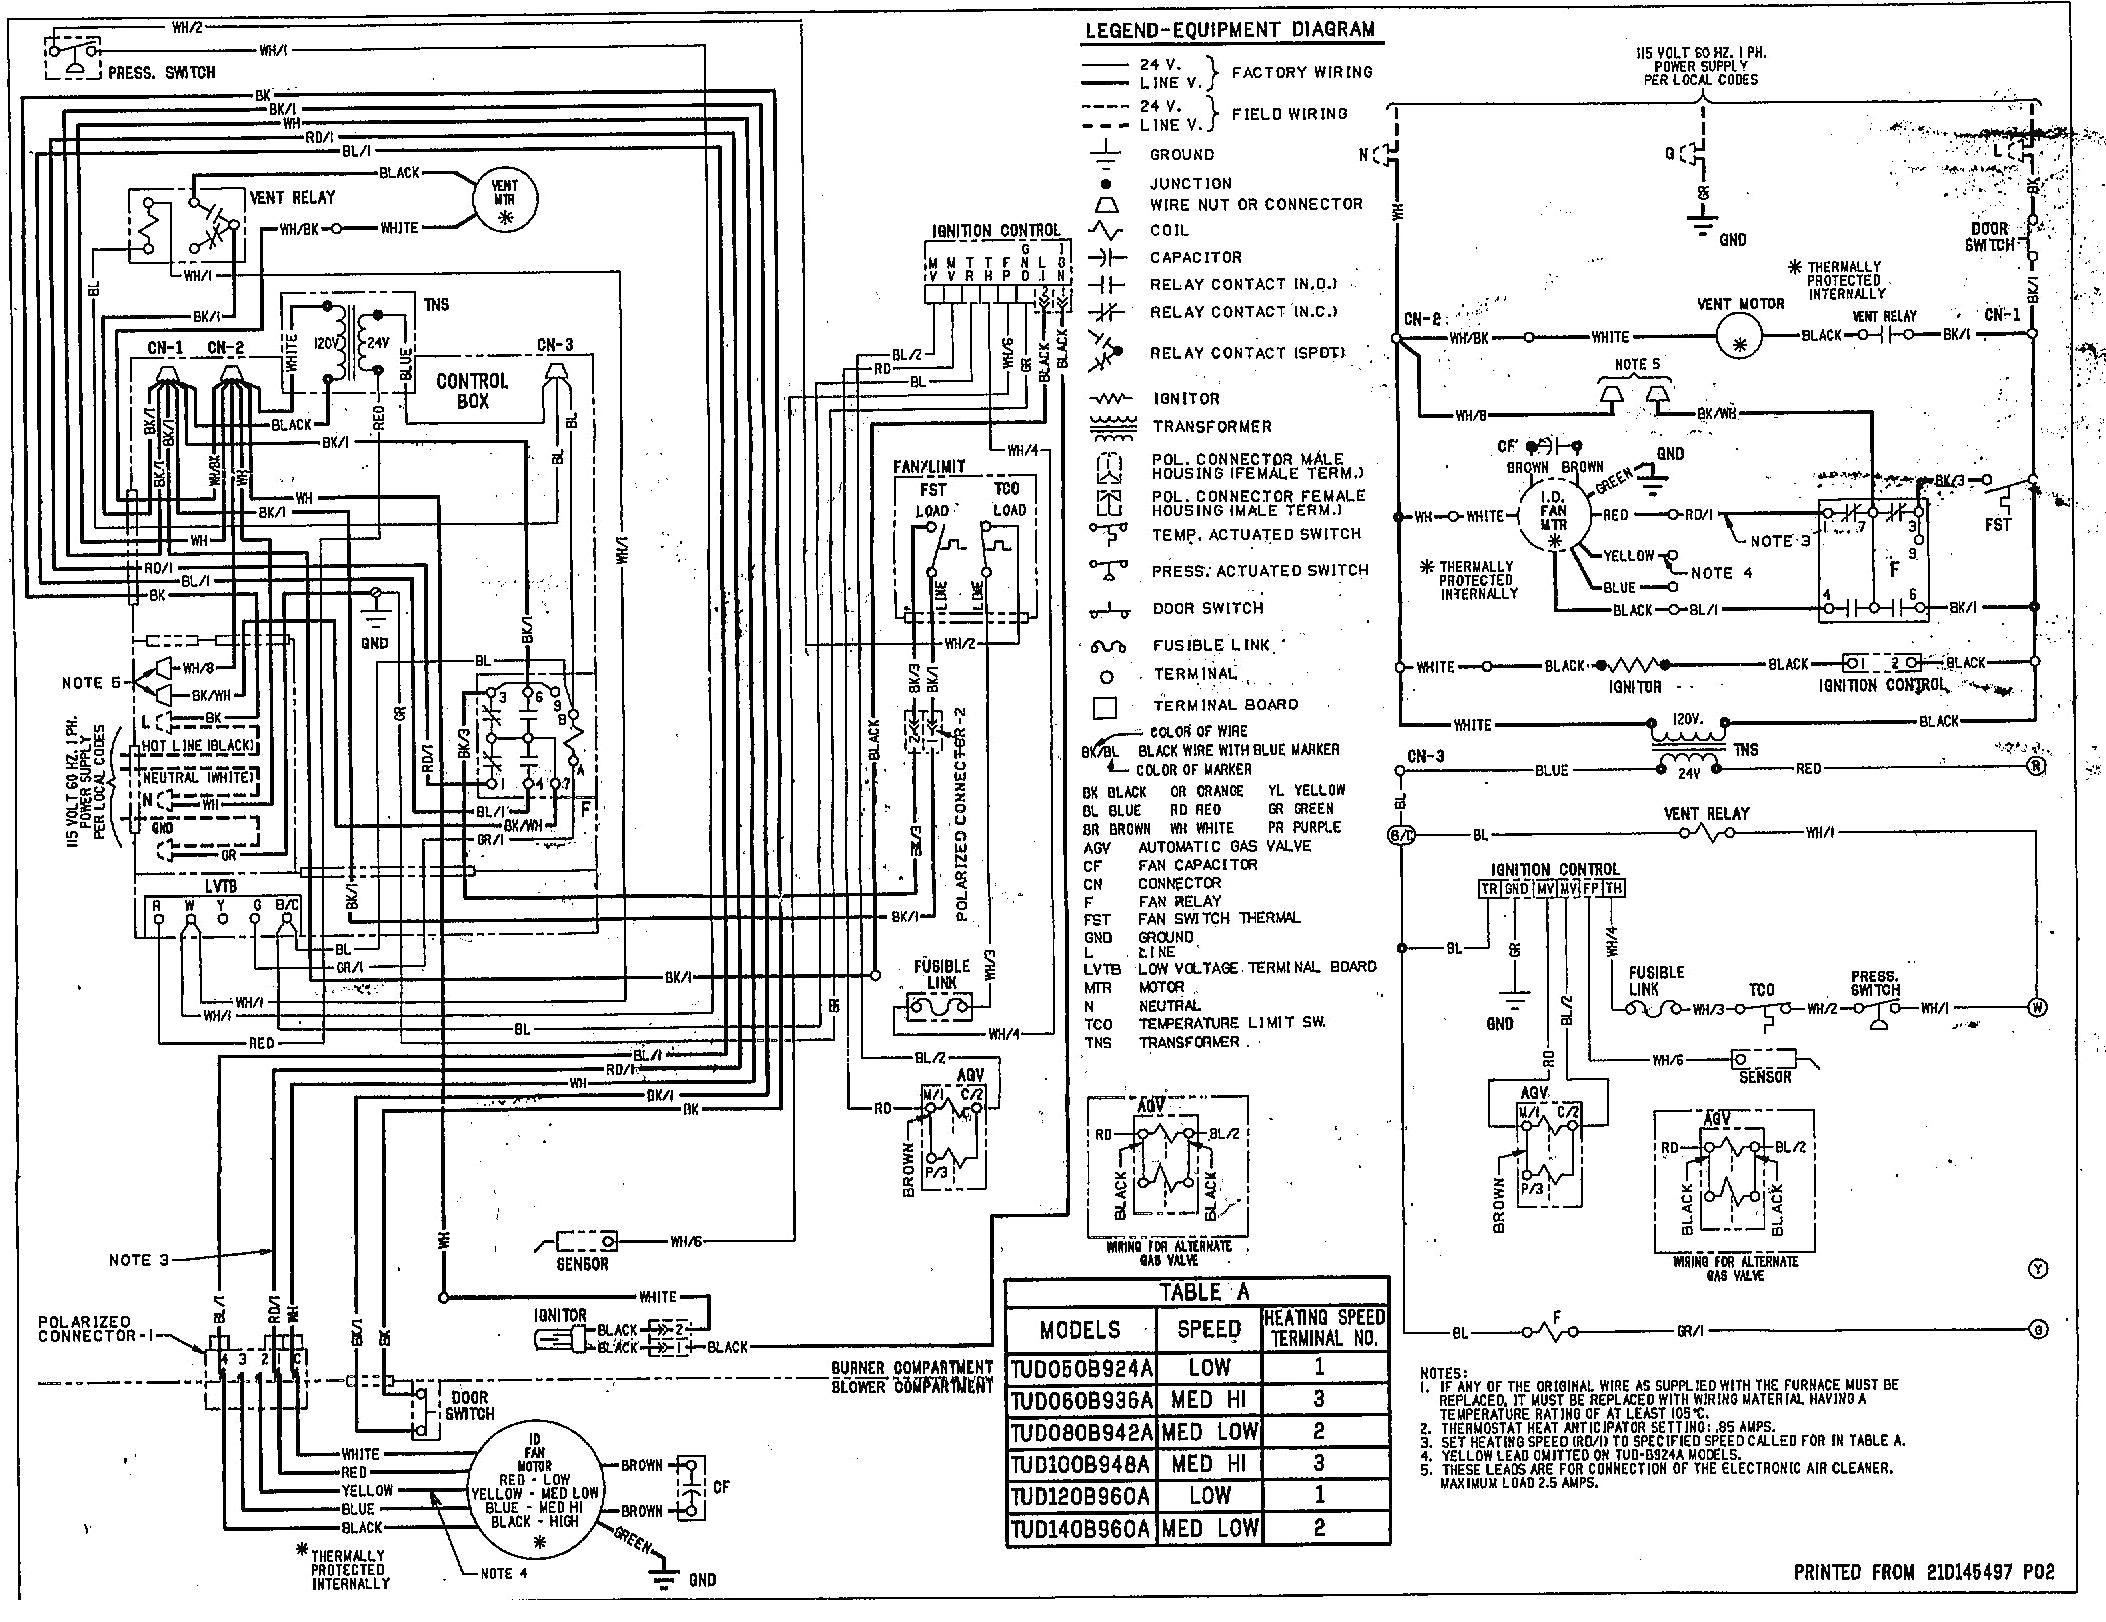 Passenger partment Switches And Relays to her with P 0900c ad7f0 further Wiring Diagram line as well an